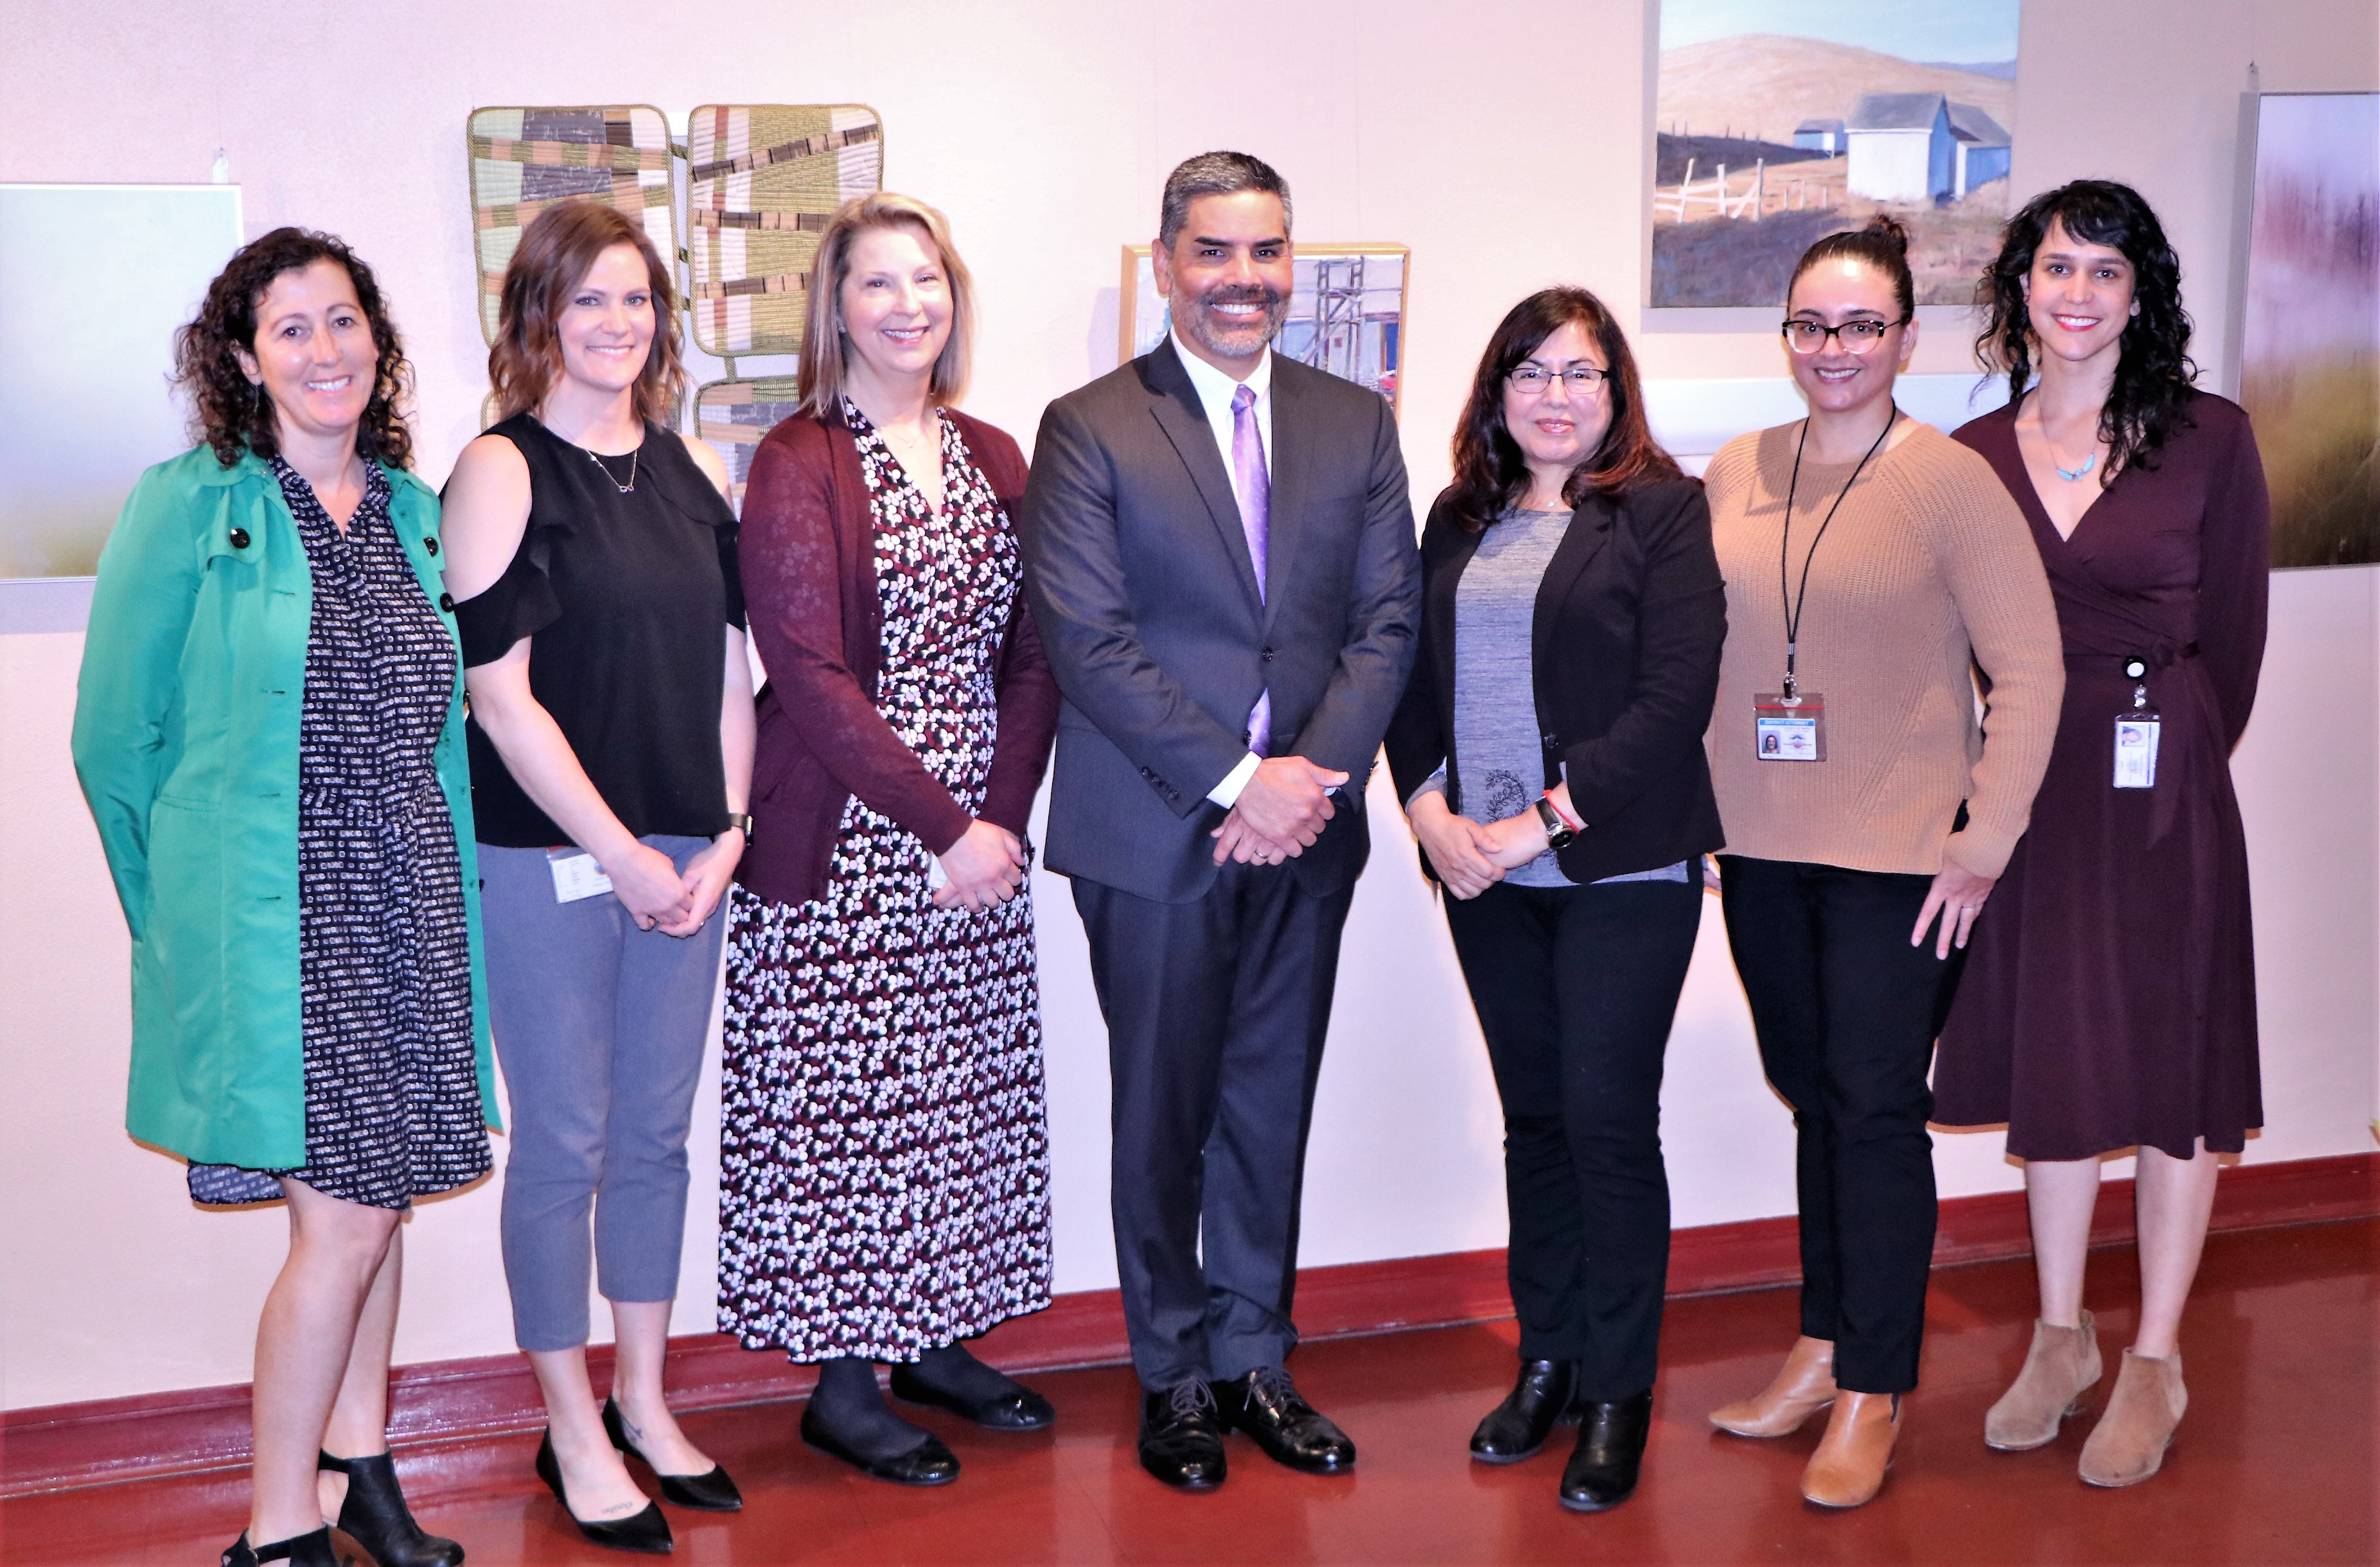 Seven staff members from the District Attorney's Office and the Community Development Agency who collaborate on the Rental Housing Dispute Resolution program.